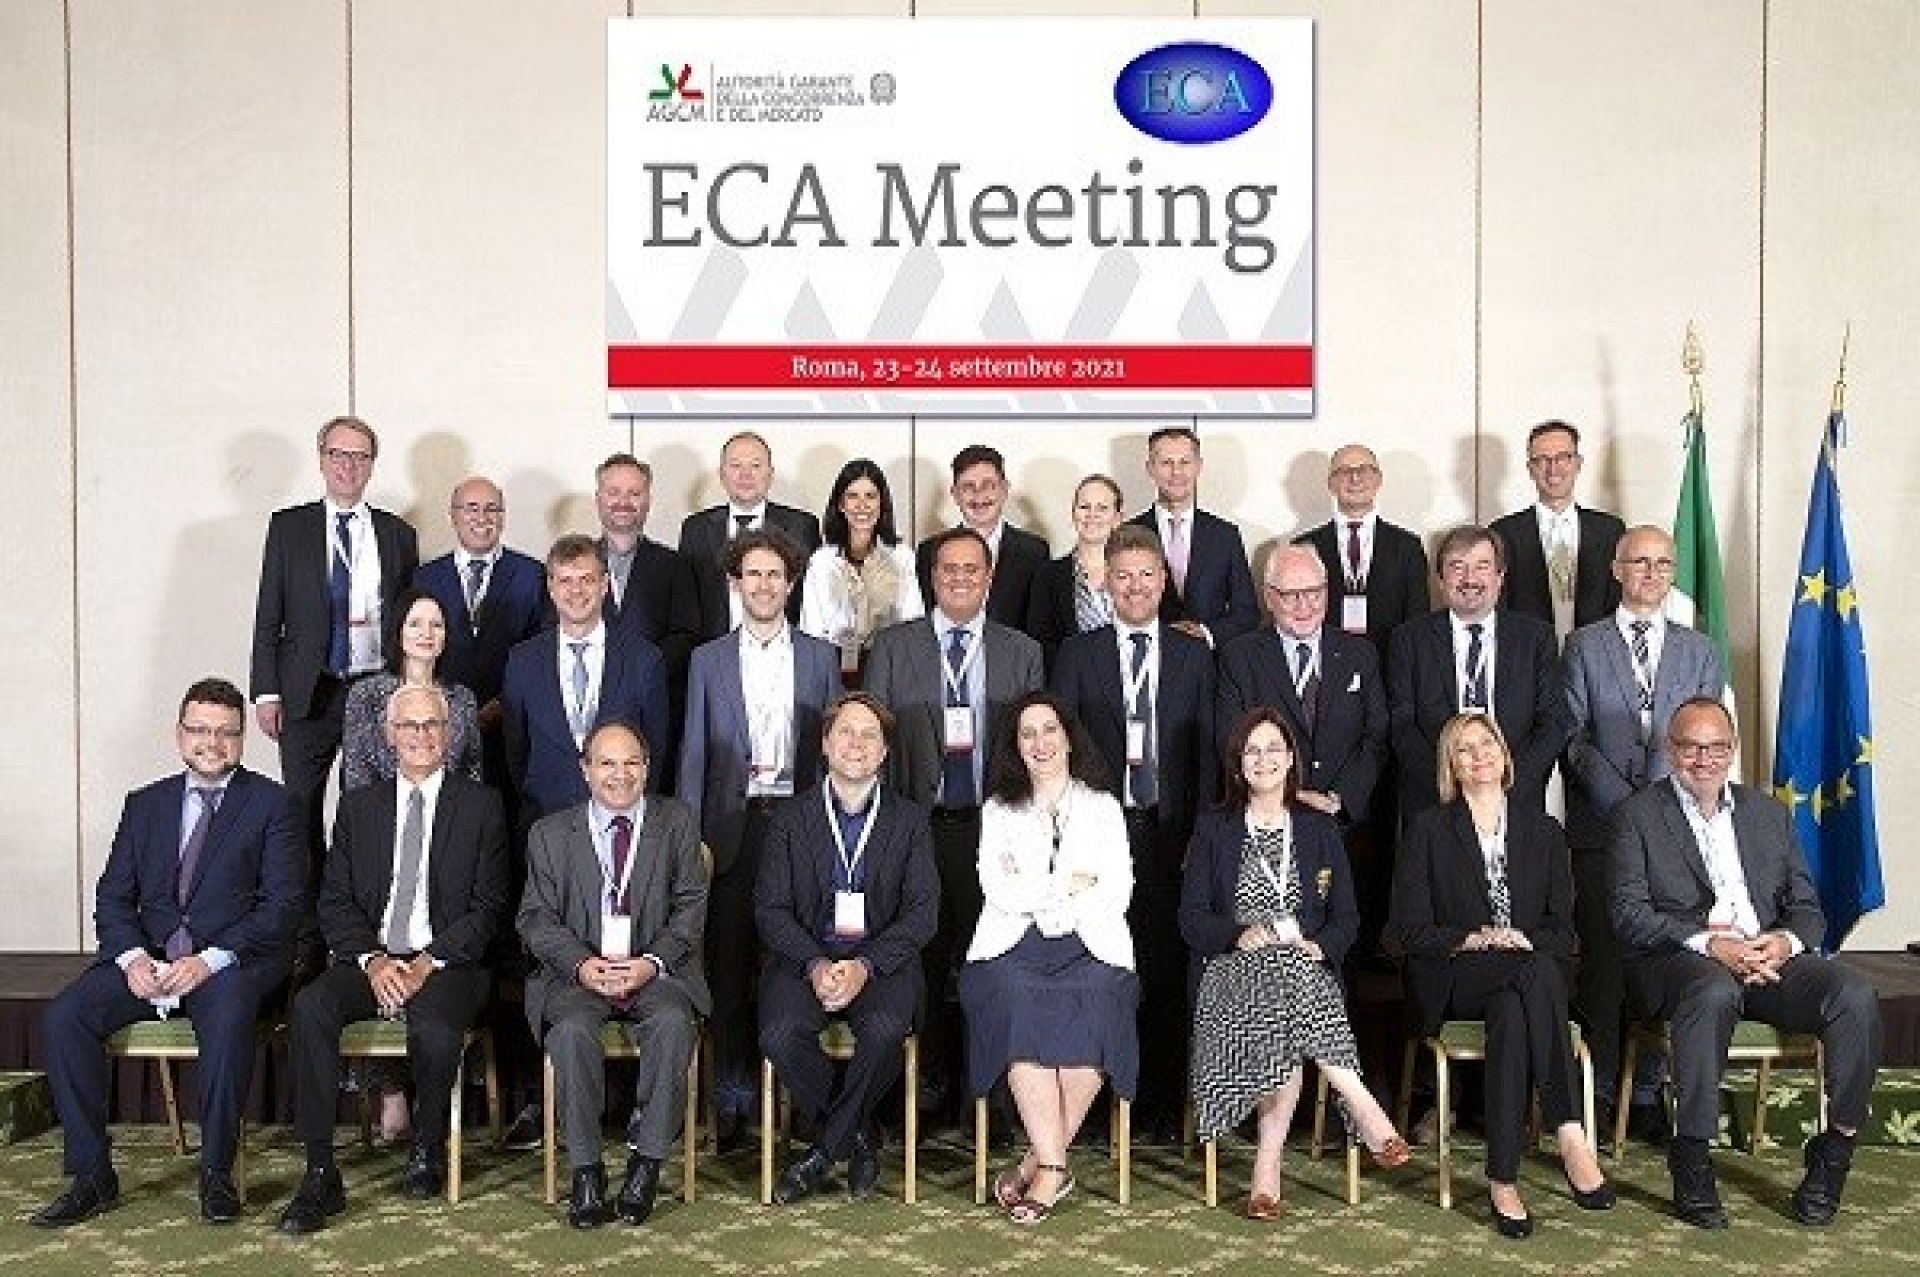 Press Release - Antitrust: the ECA meeting ended, Digital Market Act and competition policy on the table